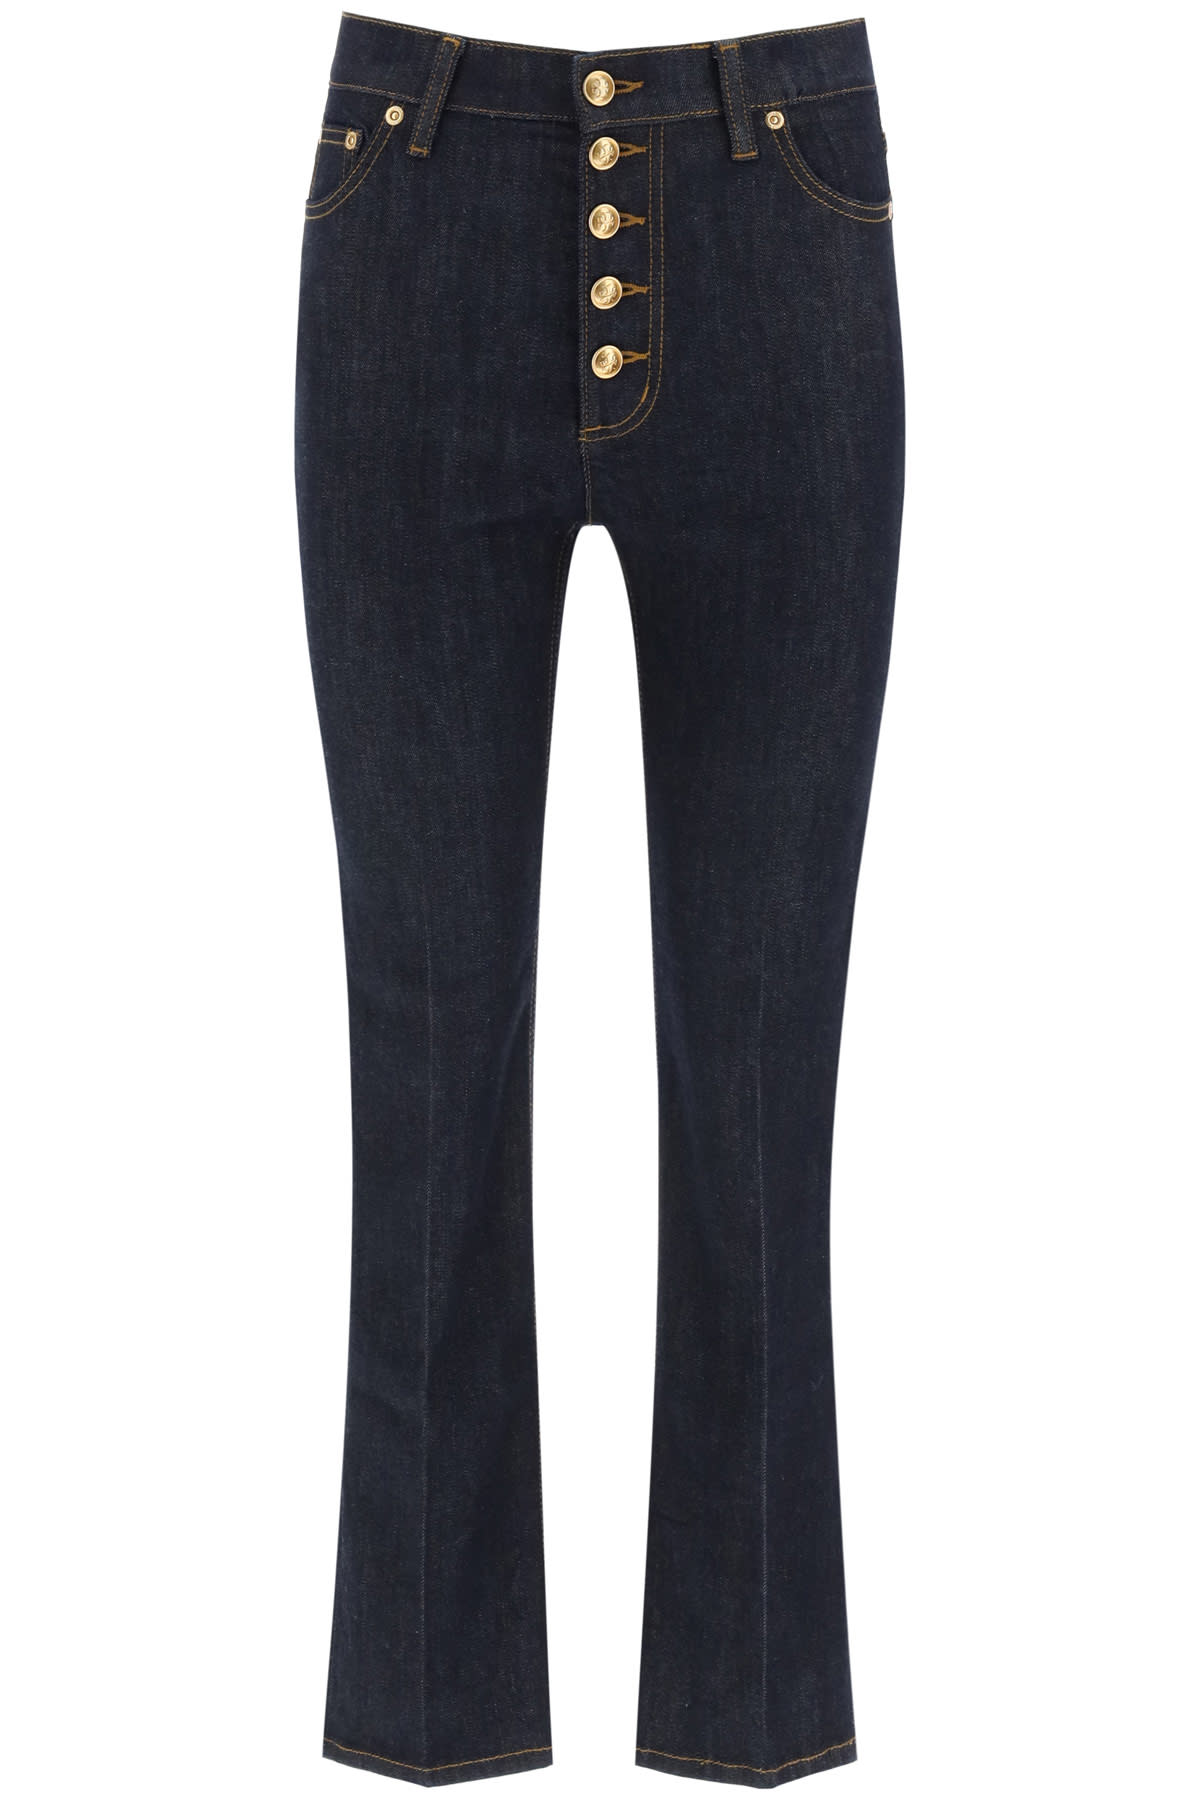 Tory Burch Button-fly Jeans